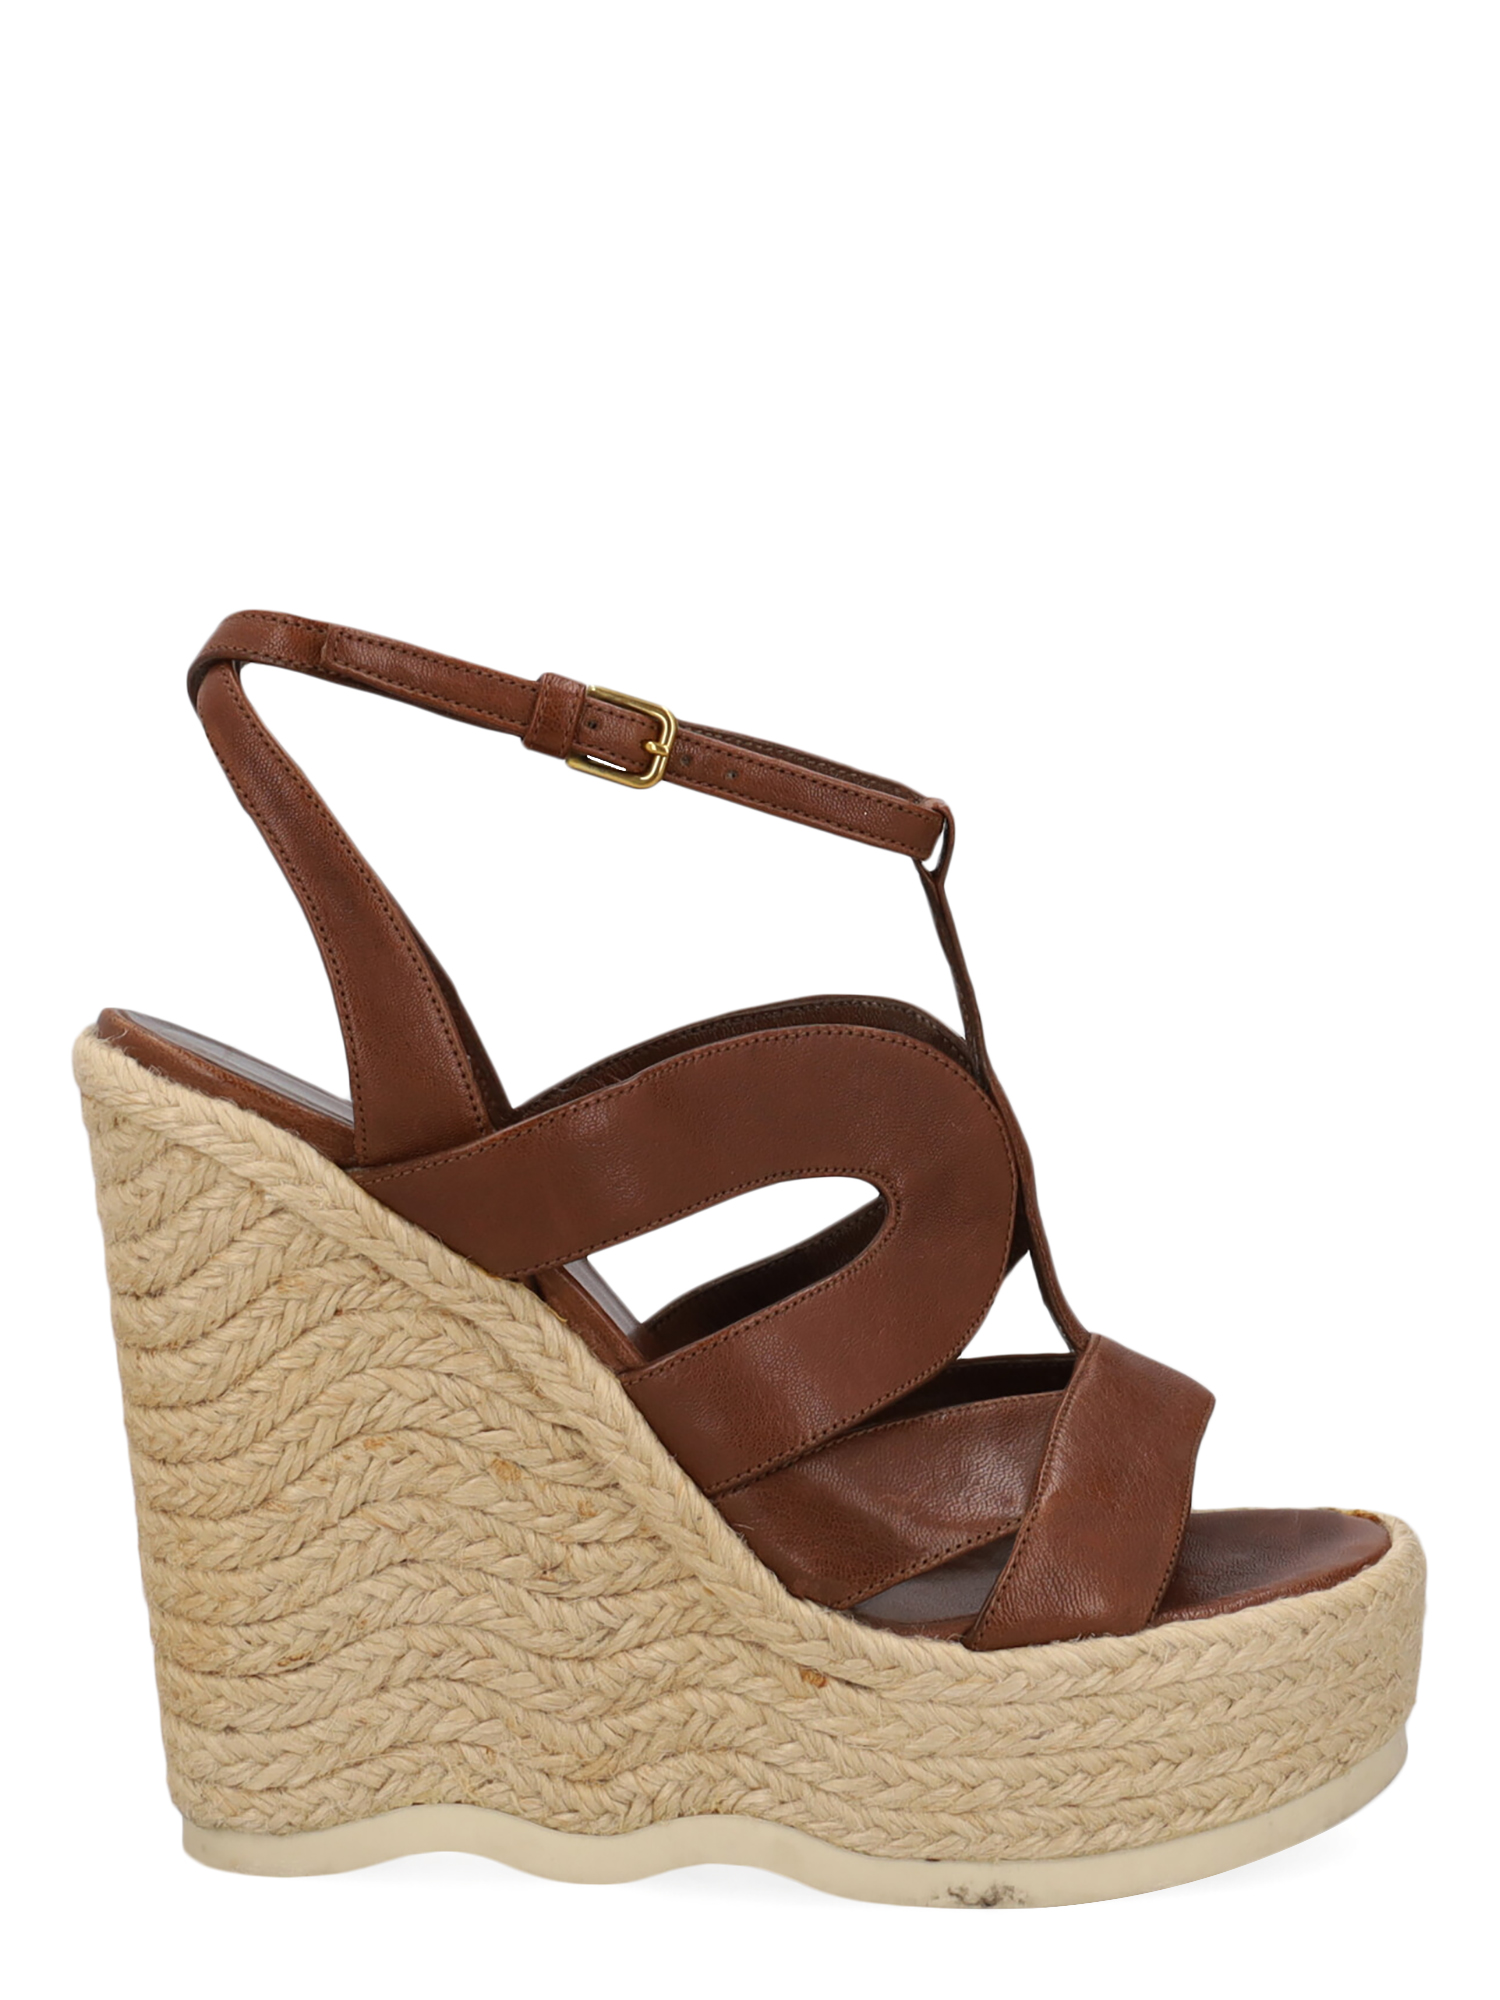 Pre-owned Saint Laurent Women's Wedges -  - In Brown Leather